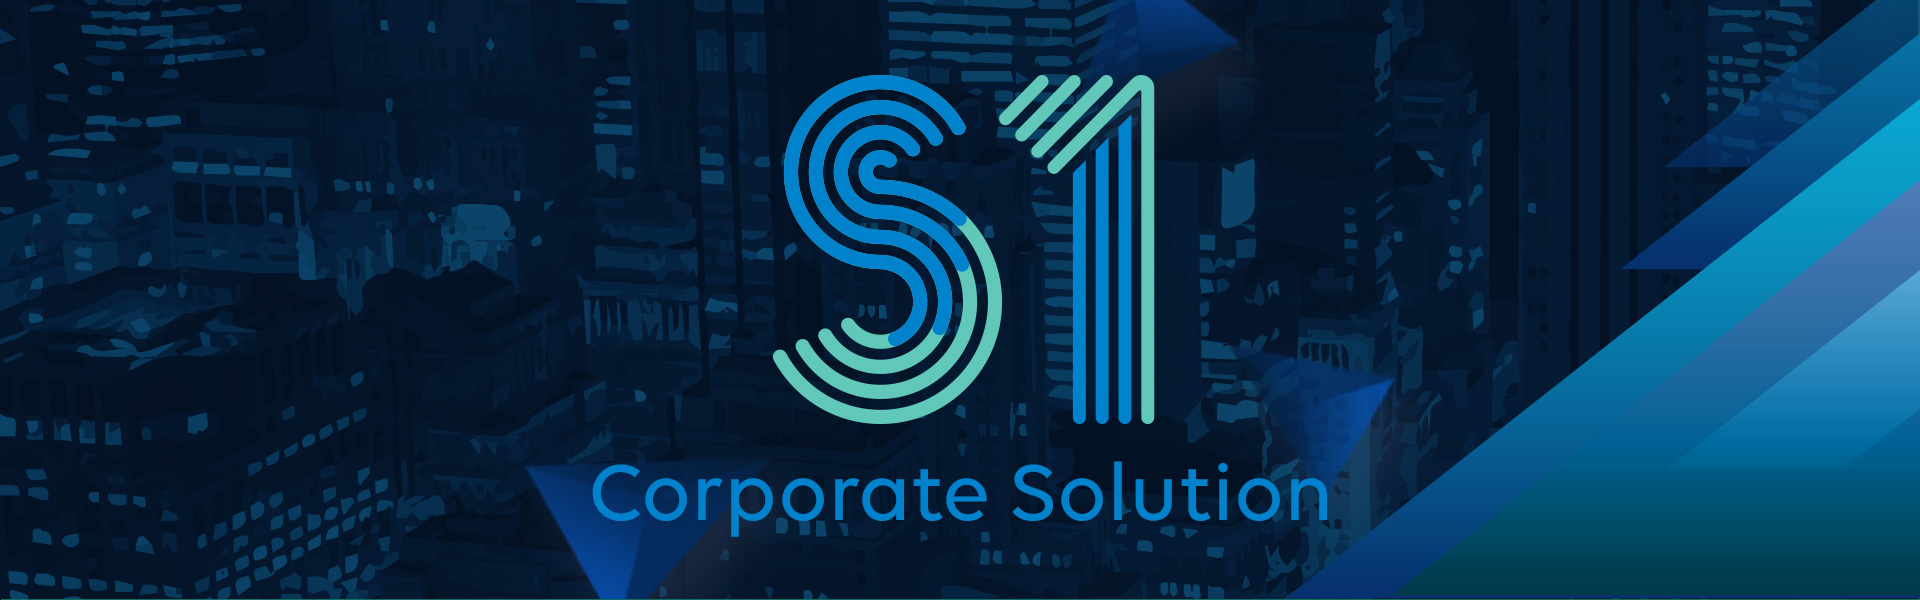 Corporate Solution One